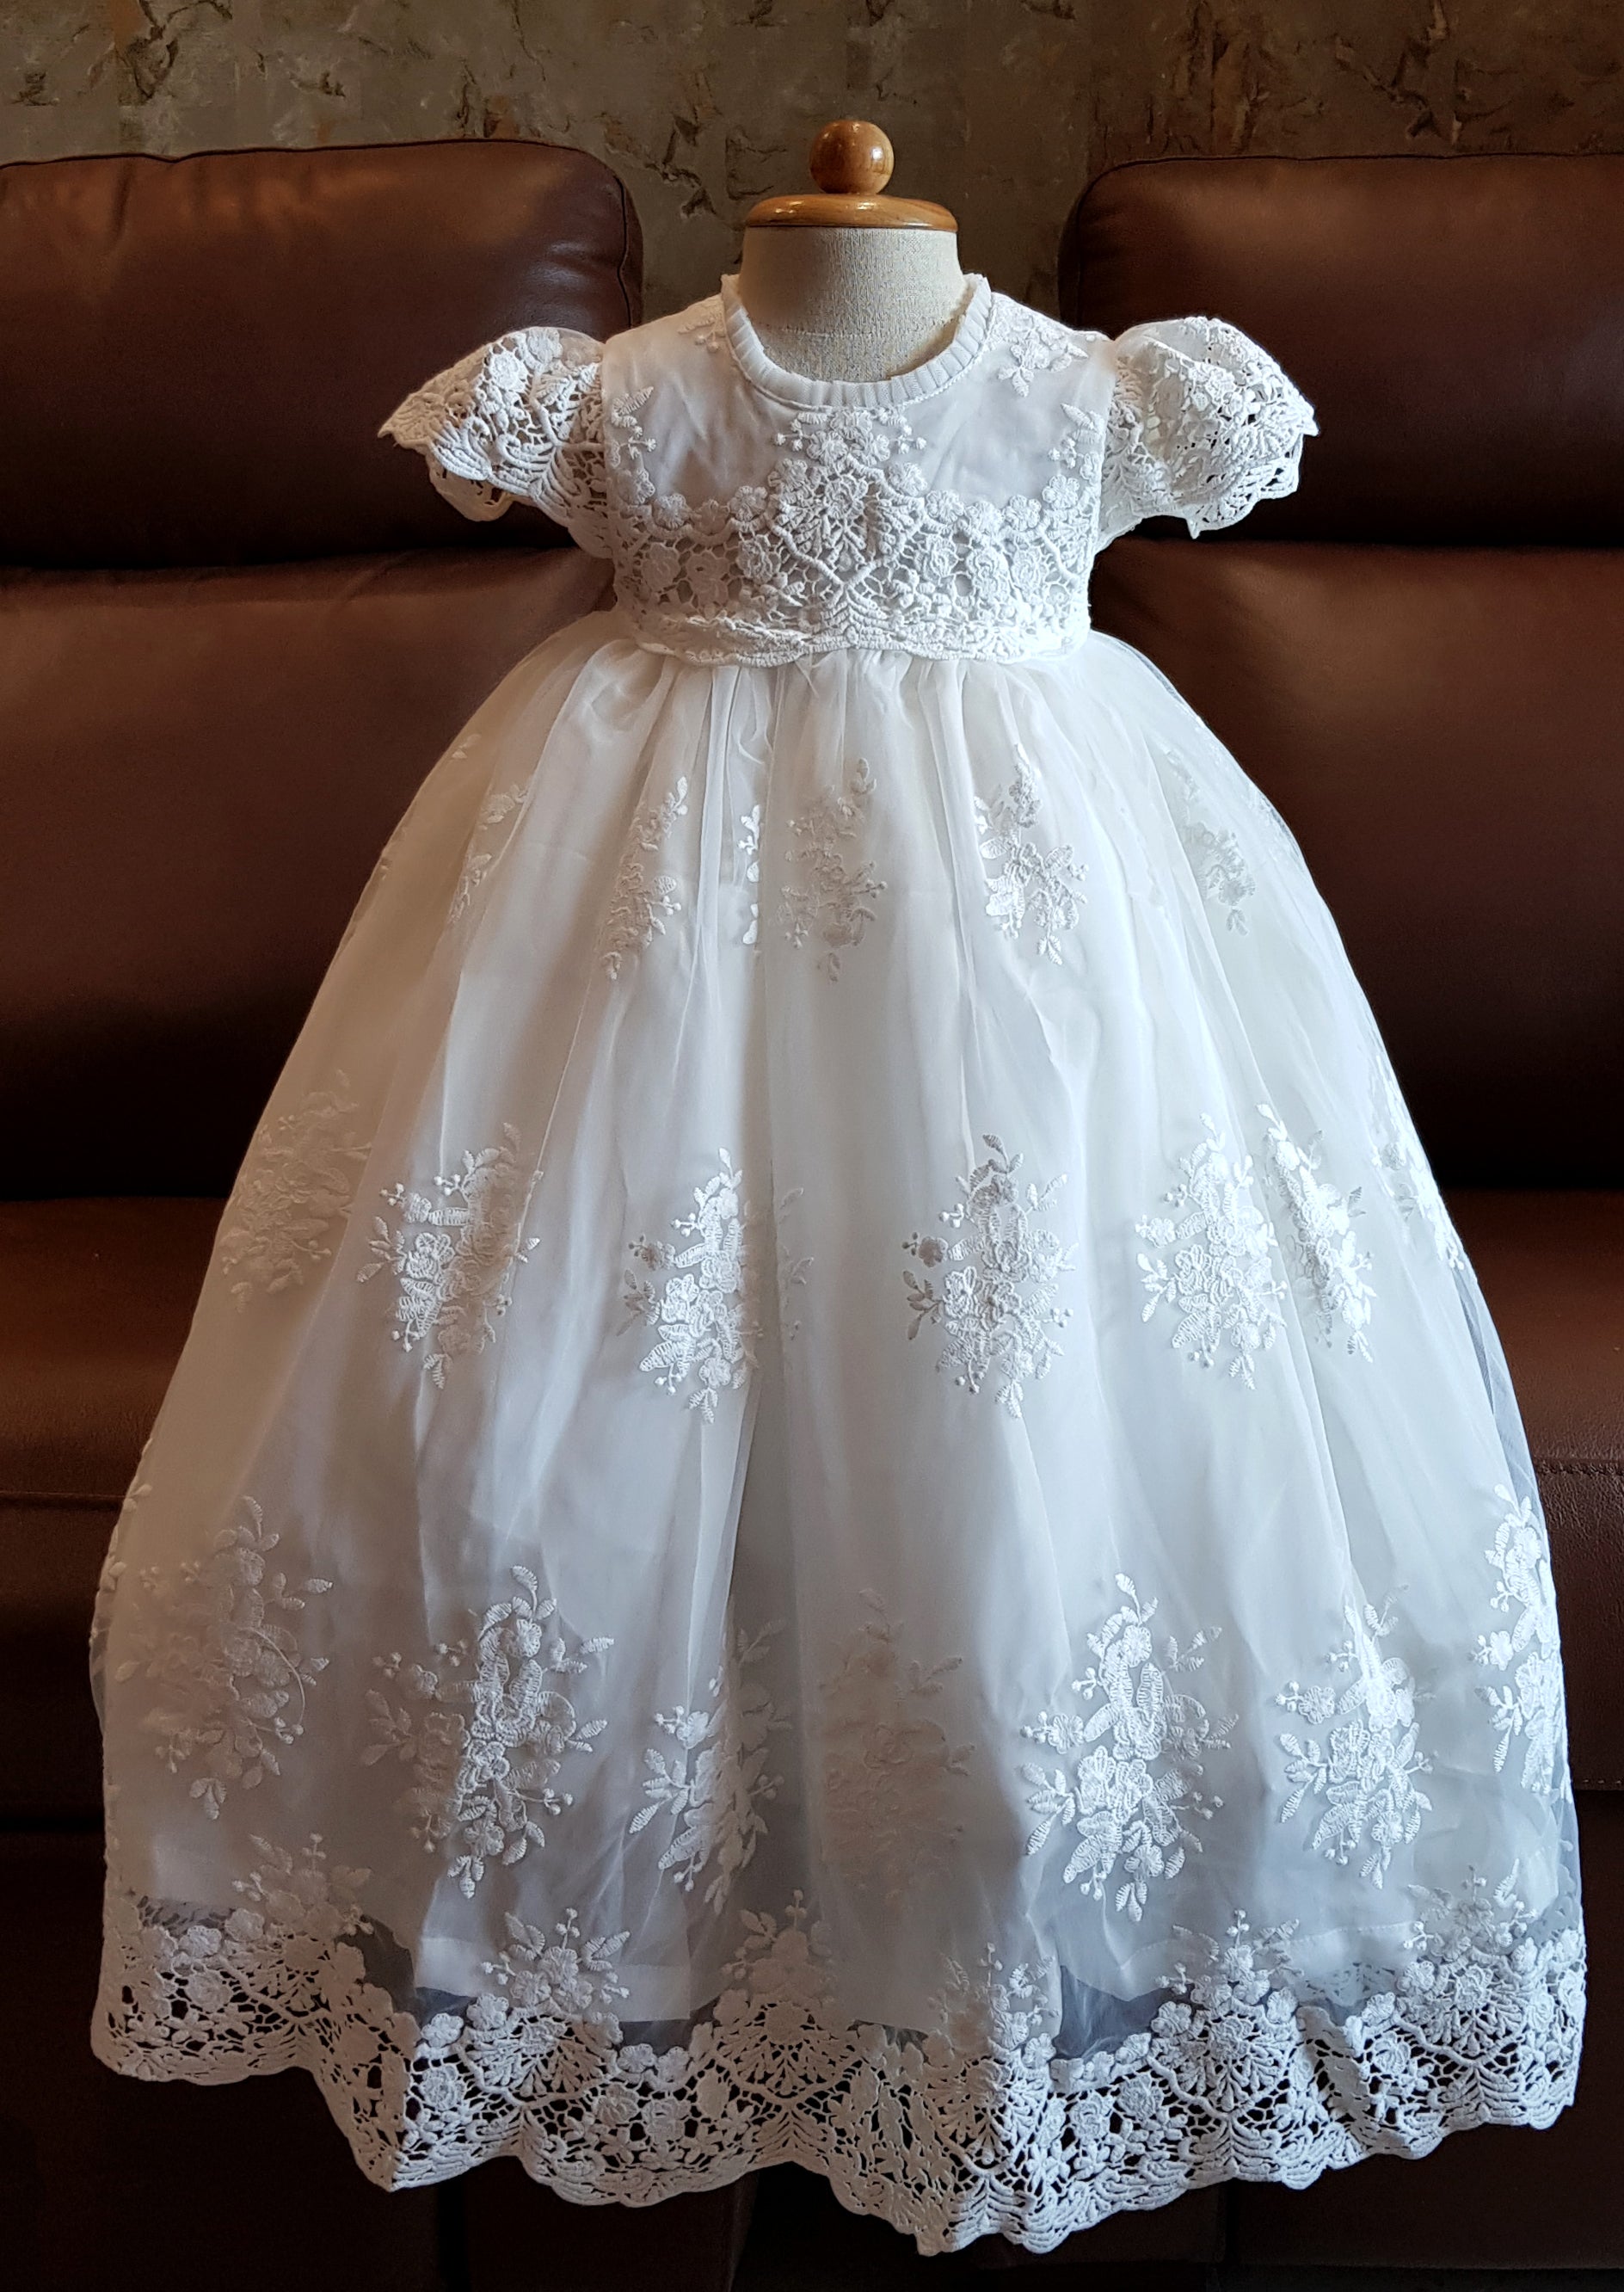 Pretty White Lace Baby Christening Dresses Kids Baptism Gowns Short Sleeve  Vintage Baby Girls Christening Gowns Kids Dress From Cinderelladress,  $97.44 | DHgate.Com